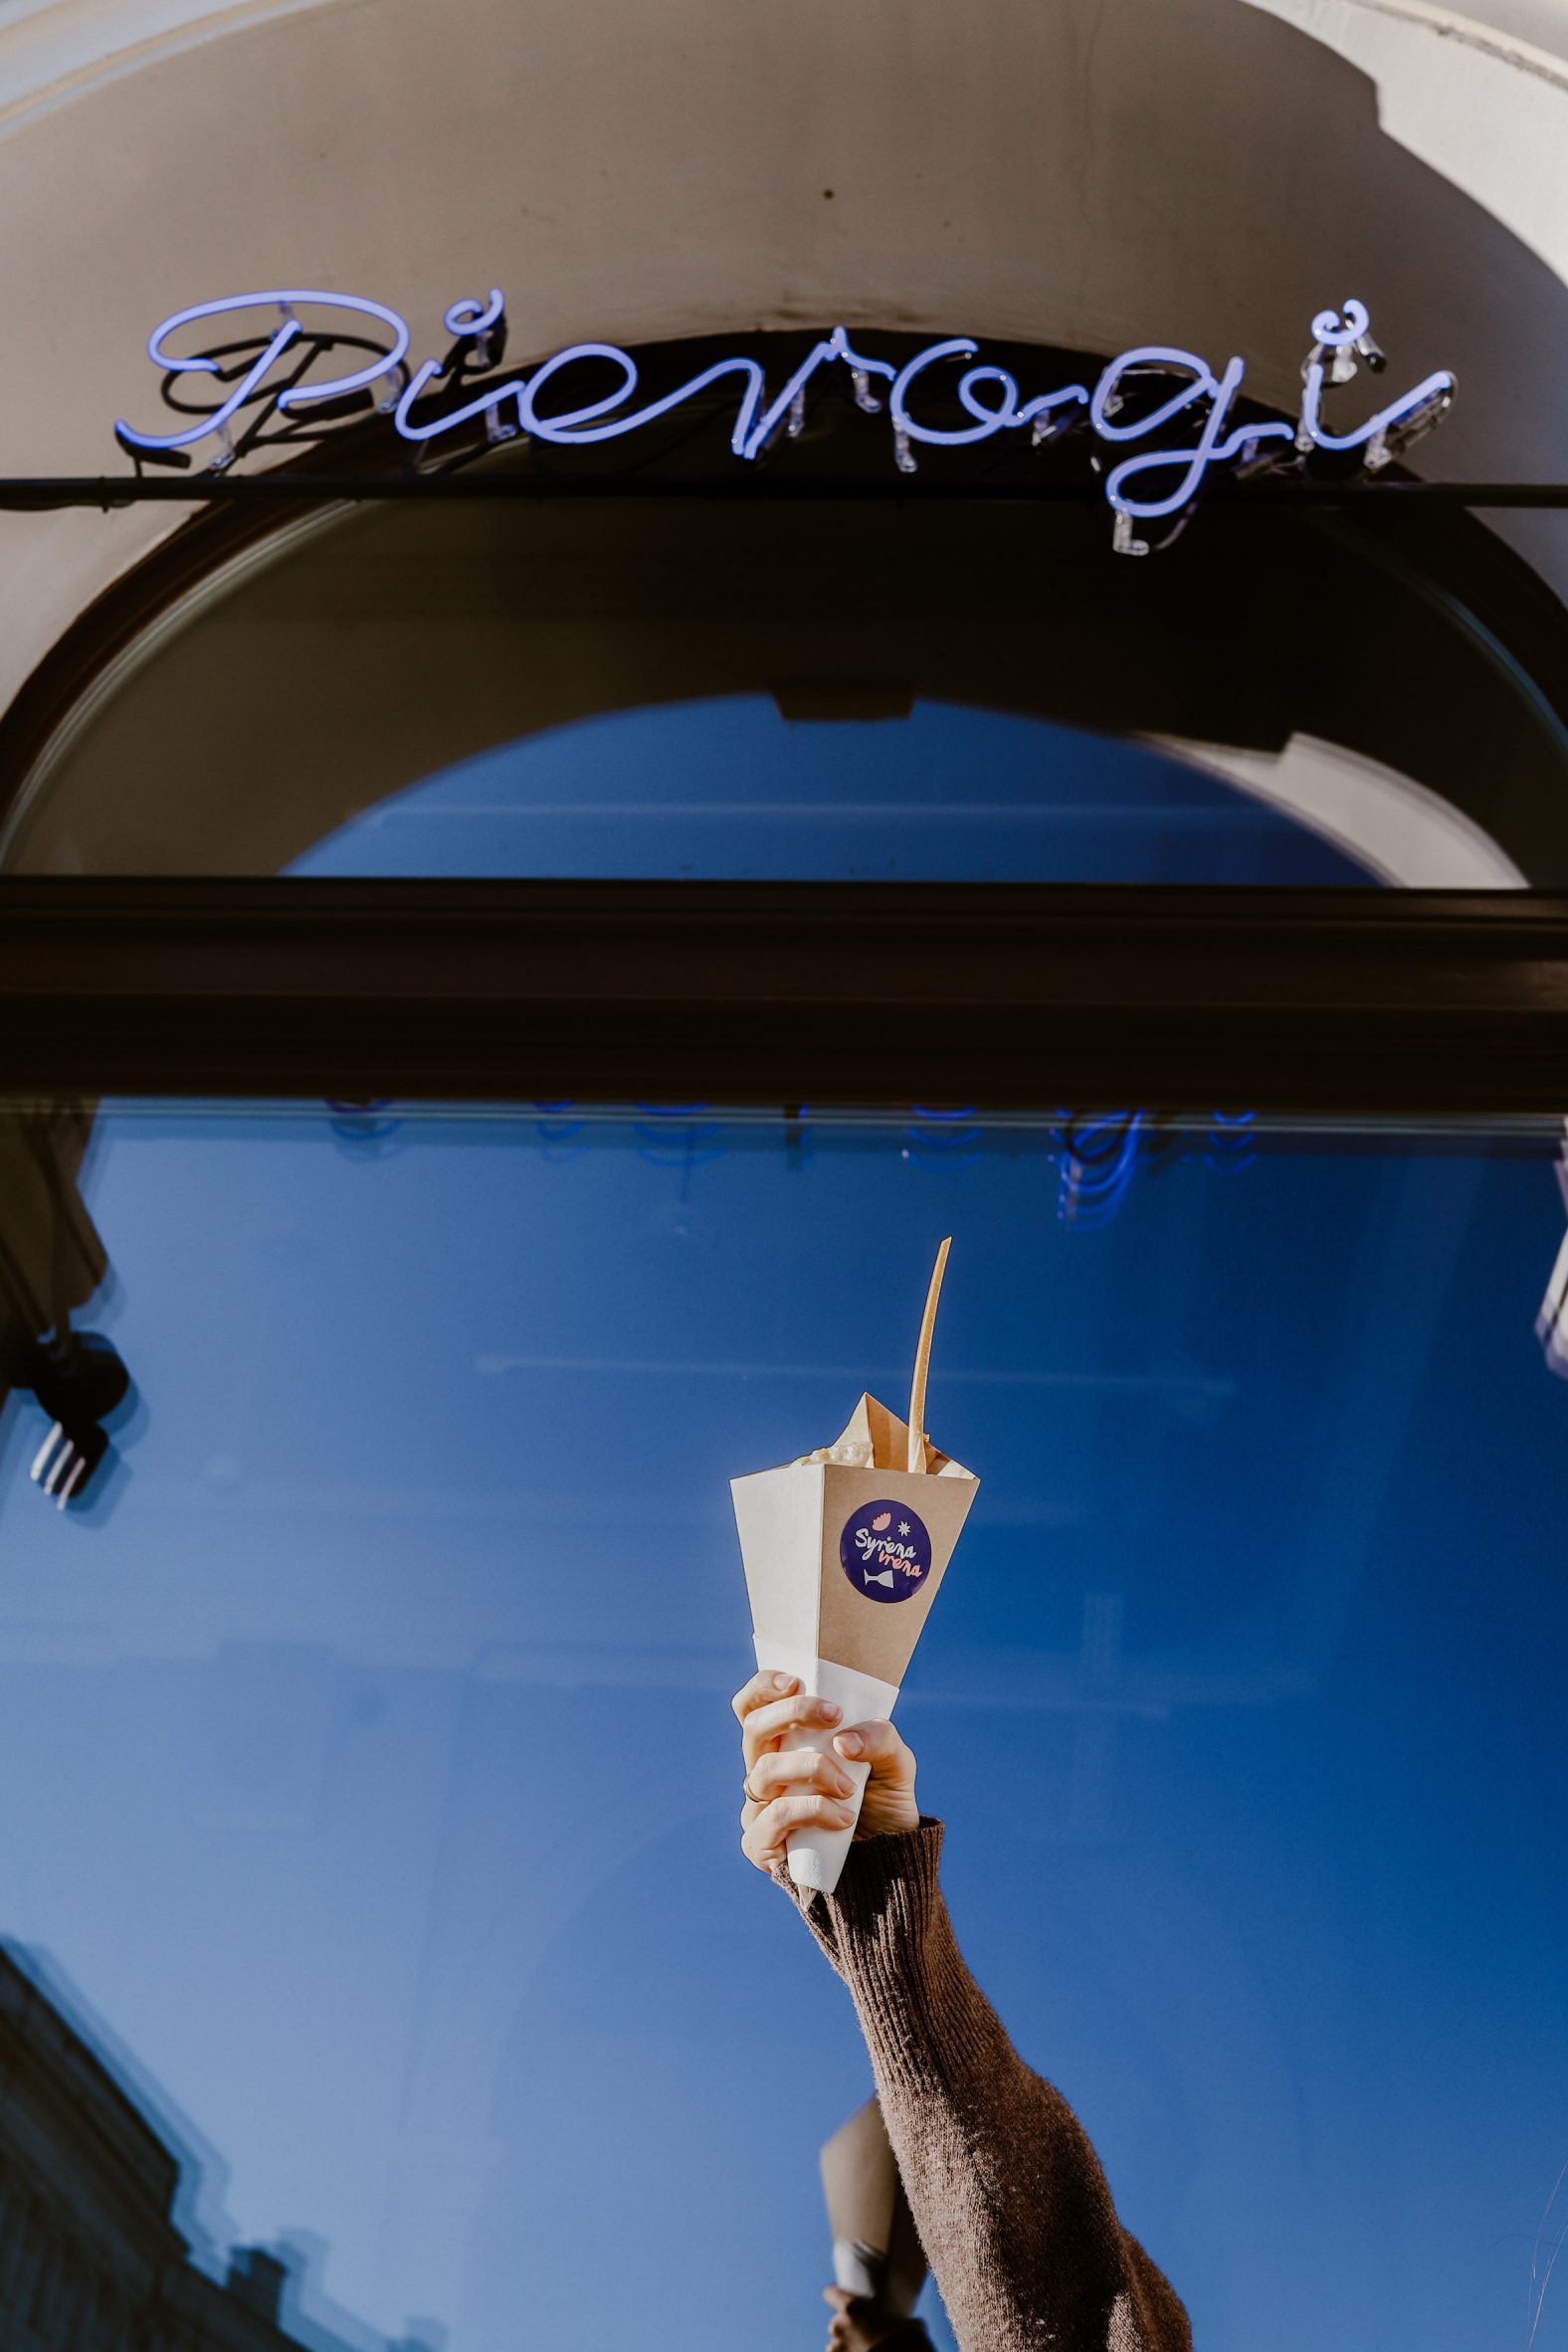 Exterior Syrena Irena pierogi restaurant with neon sign and hand holding a cone of dumplings